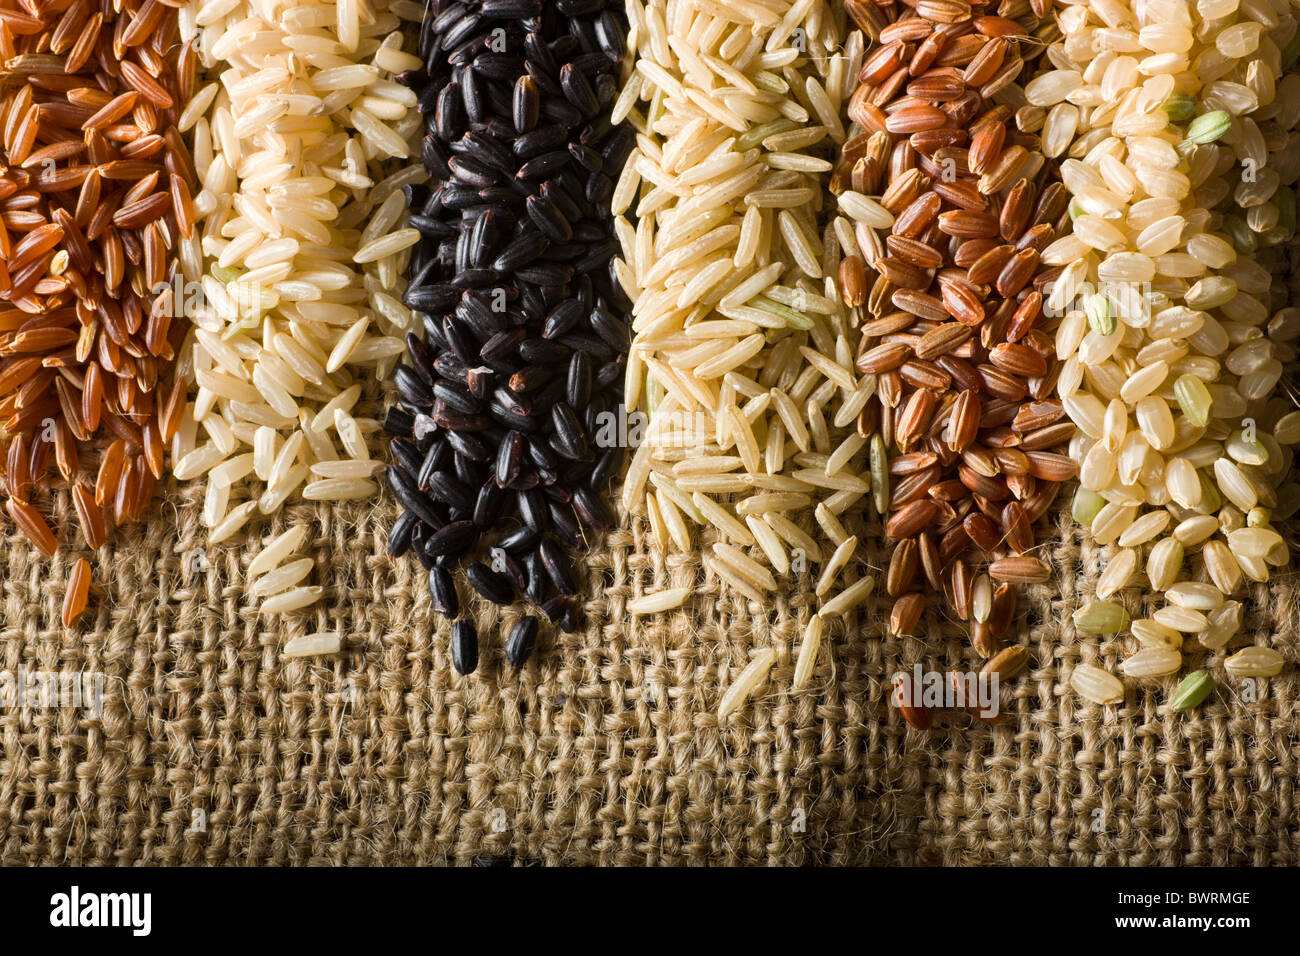 Six Varieties of Raw Brown Rice. From left to right: 1. Himalayan Red Rice - 2. Long-Grain Brown Rice - 3. Chinese Forbidden Bla Stock Photo